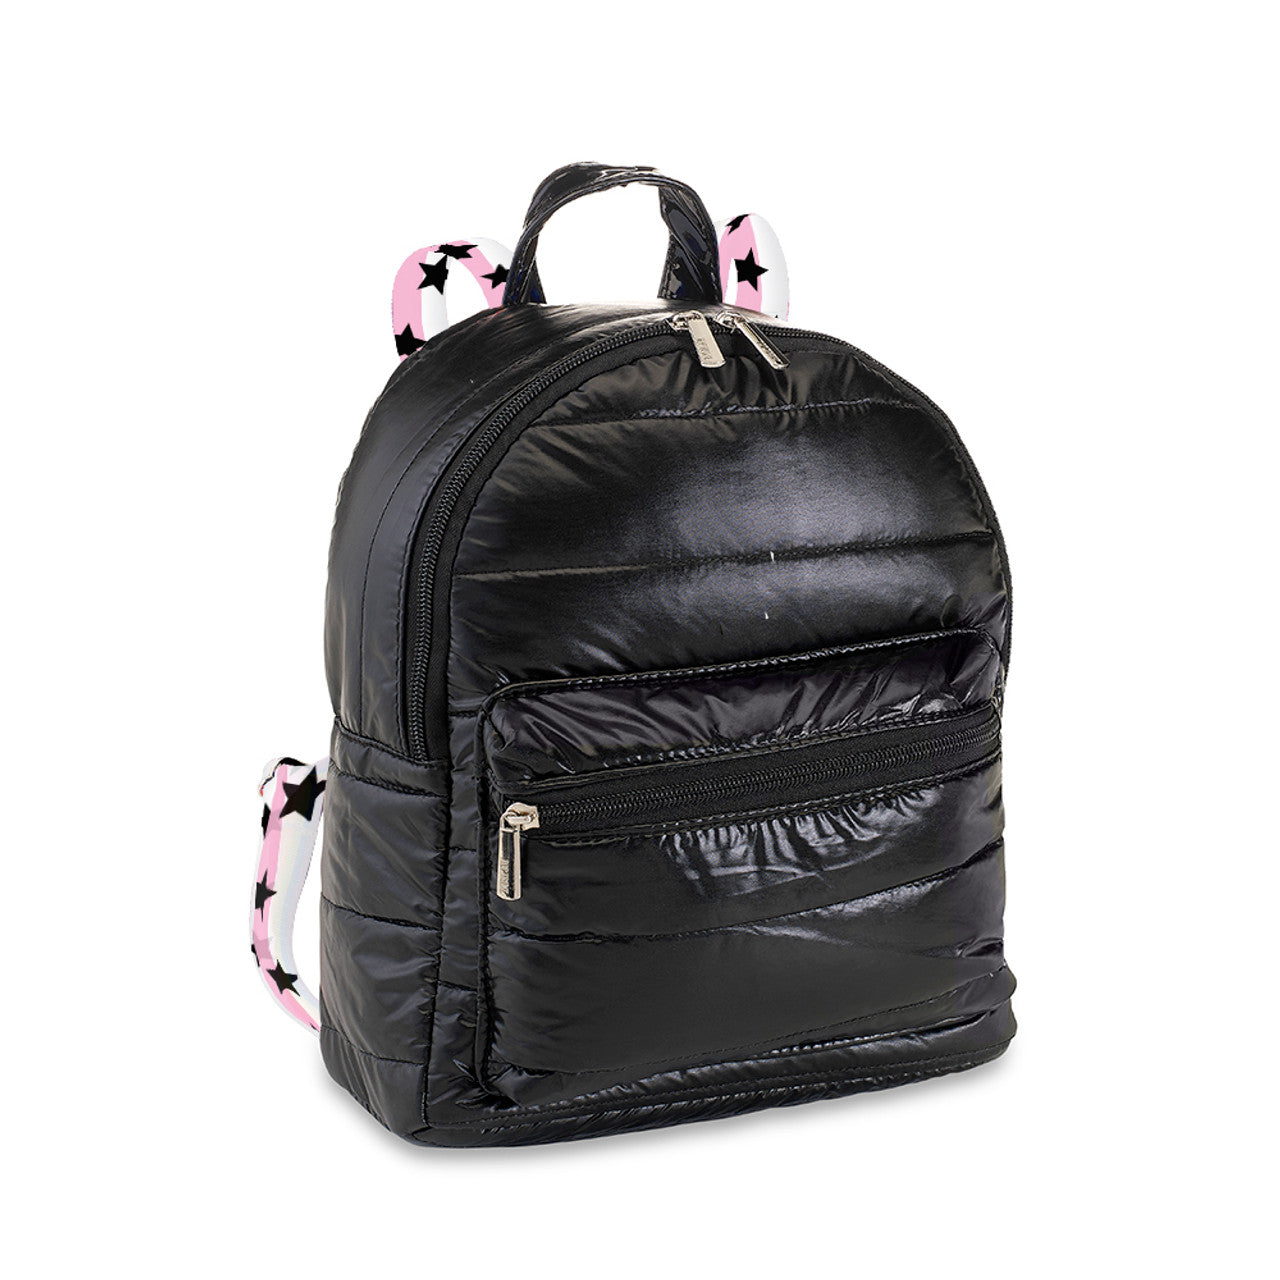 Fun Black Puffer Tiny Tote With Star Straps For Kids